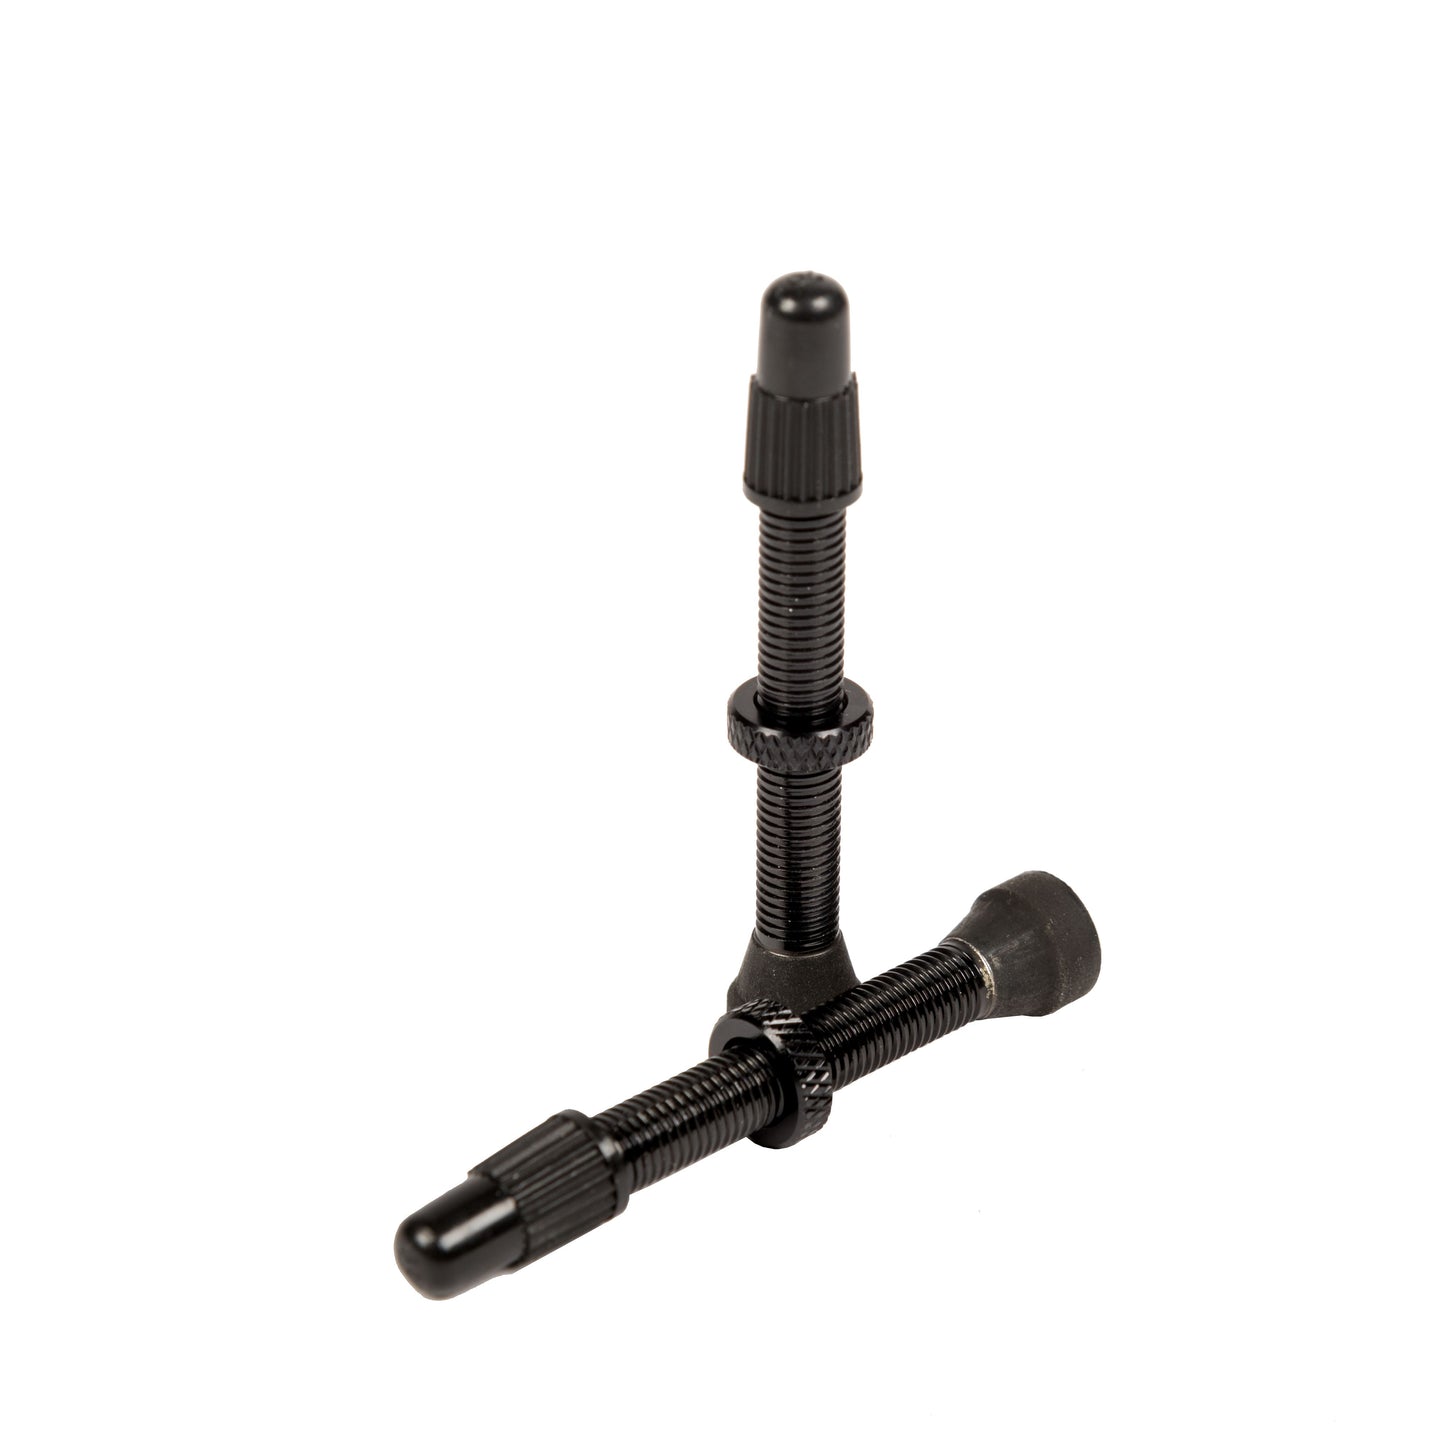 Stan's No Tubes Tubeless Valve Stems Presta Valve in Black Finish Color | Bicycle Tubeless Technology from Sprocket Kings